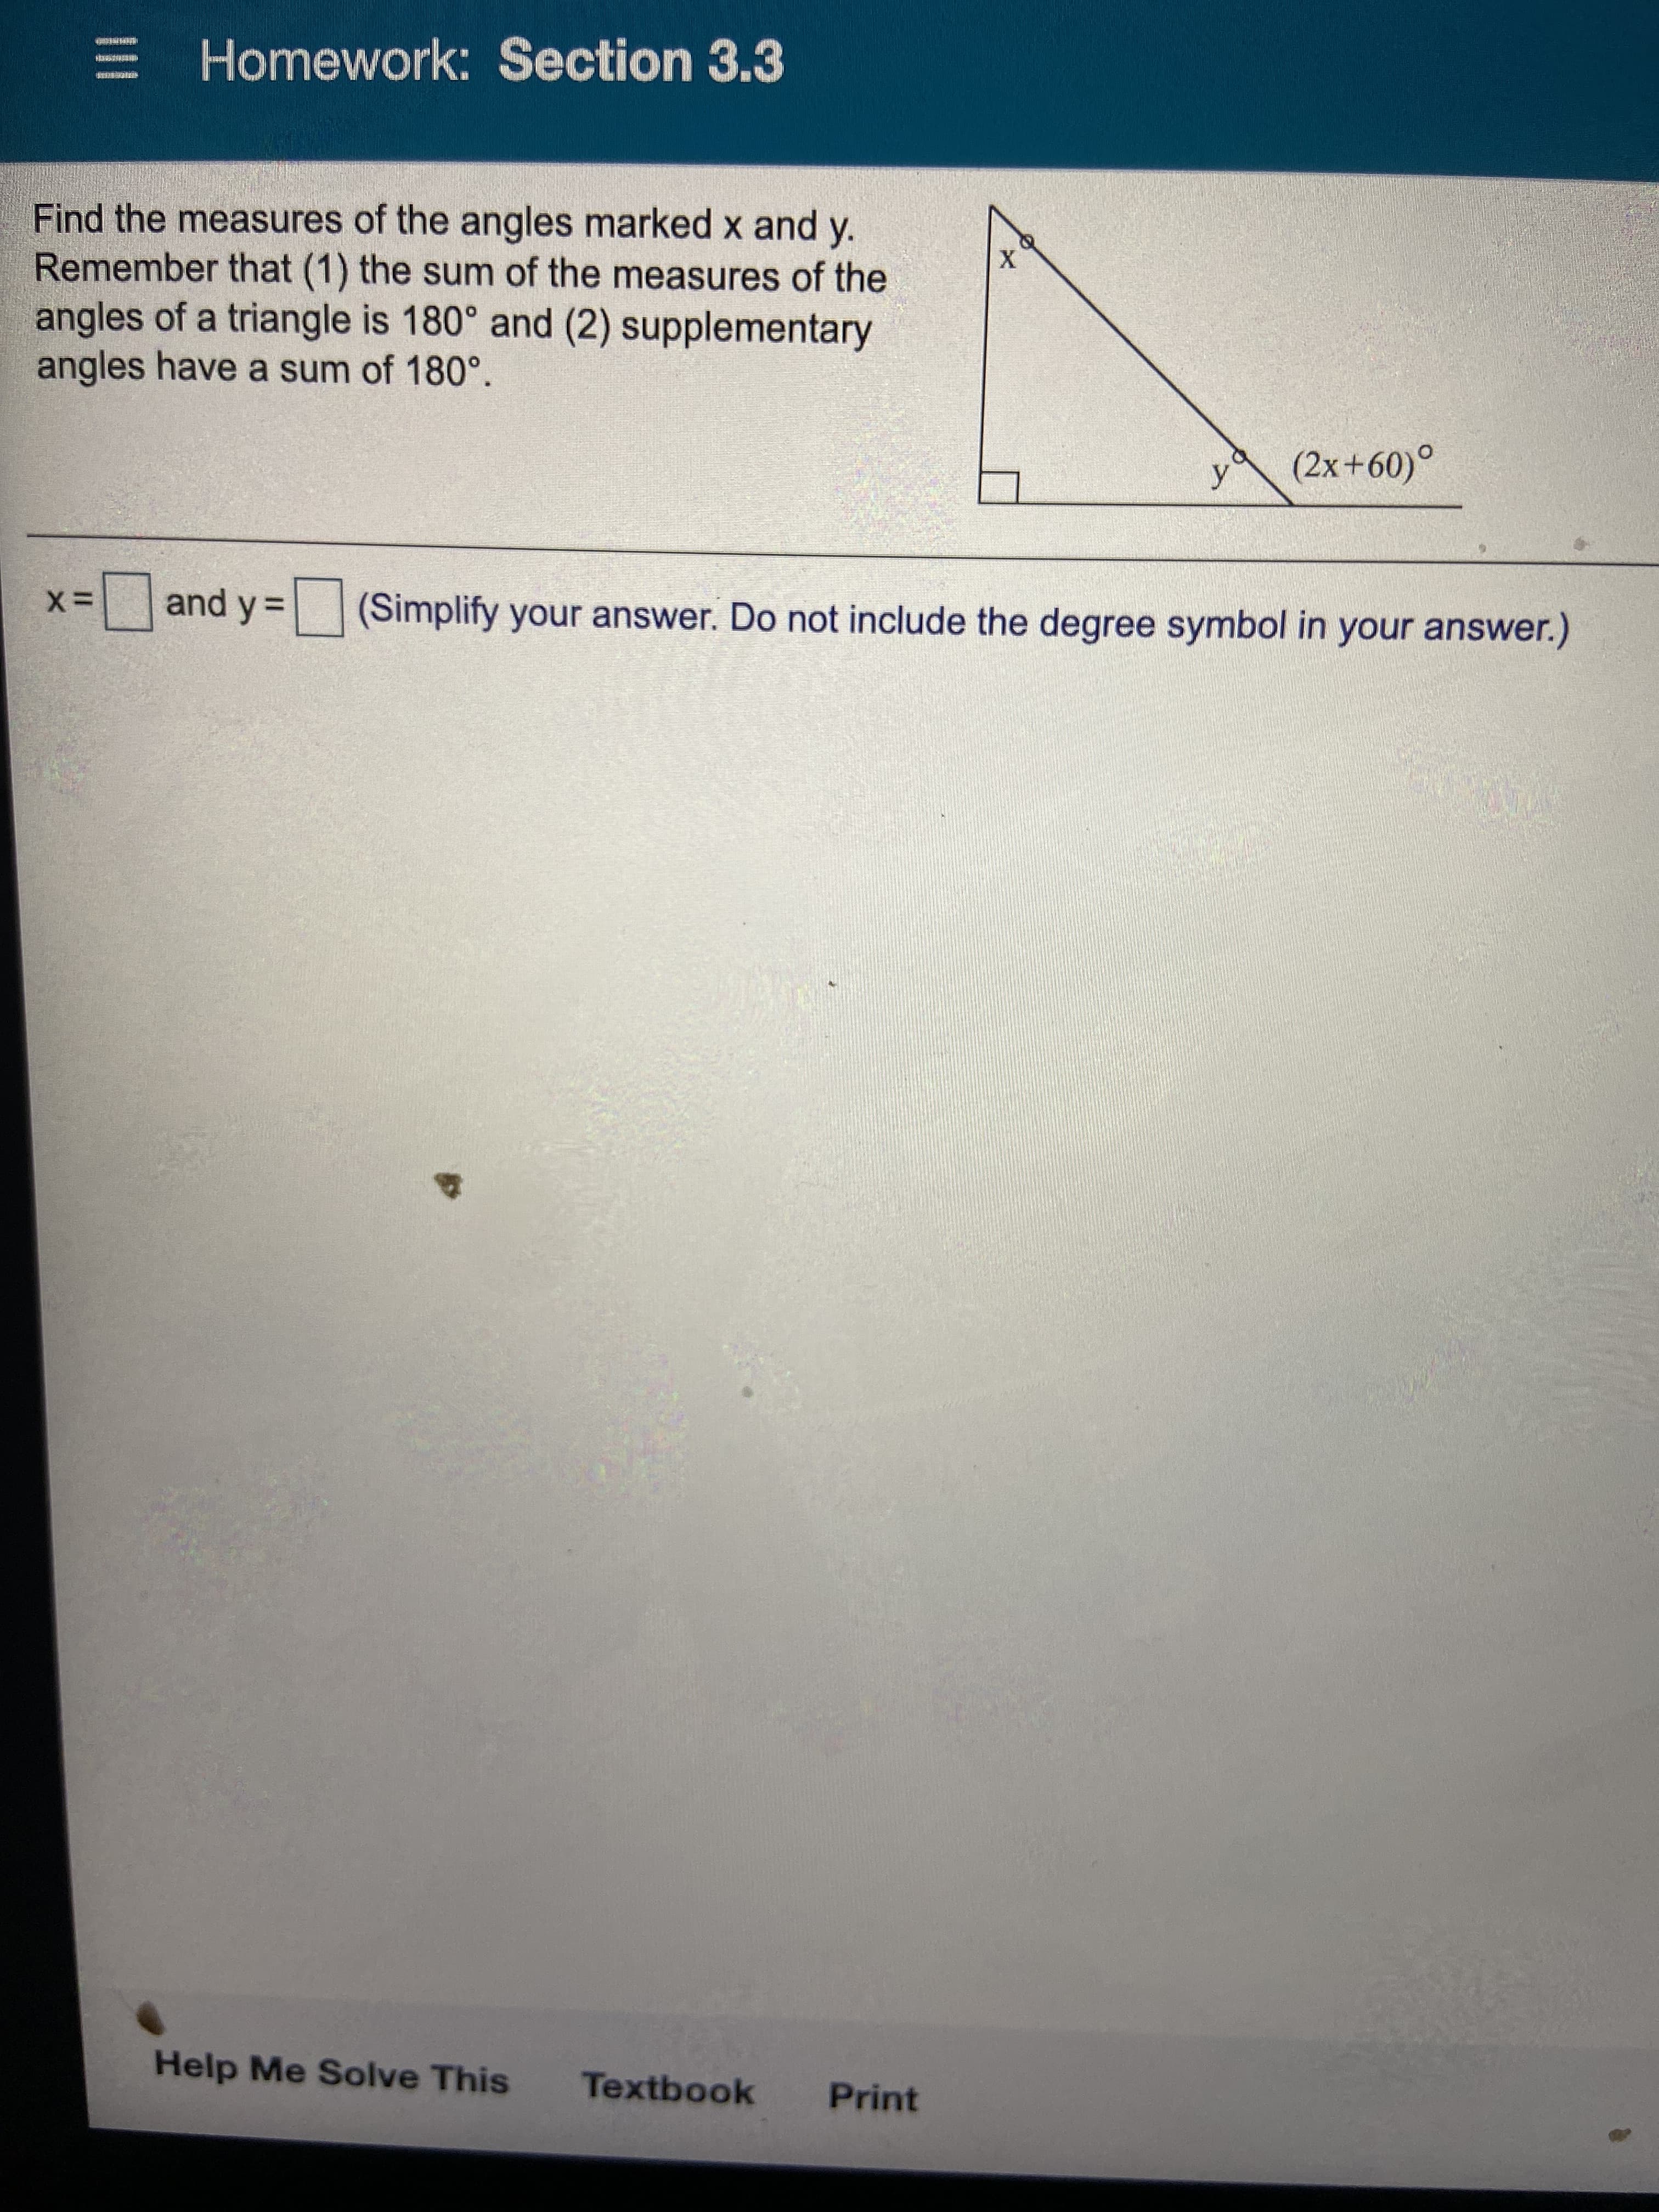 Homework: Section 3.3
Find the measures of the angles marked x and y.
Remember that (1) the sum of the measures of the
angles of a triangle is 180° and (2) supplementary
angles have a sum of 180°.
y
(2x+60)°
%and y= (Simplify your answer. Do not include the degree symbol in your answer.)
%3D
Help Me Solve This
Textbook
Print
